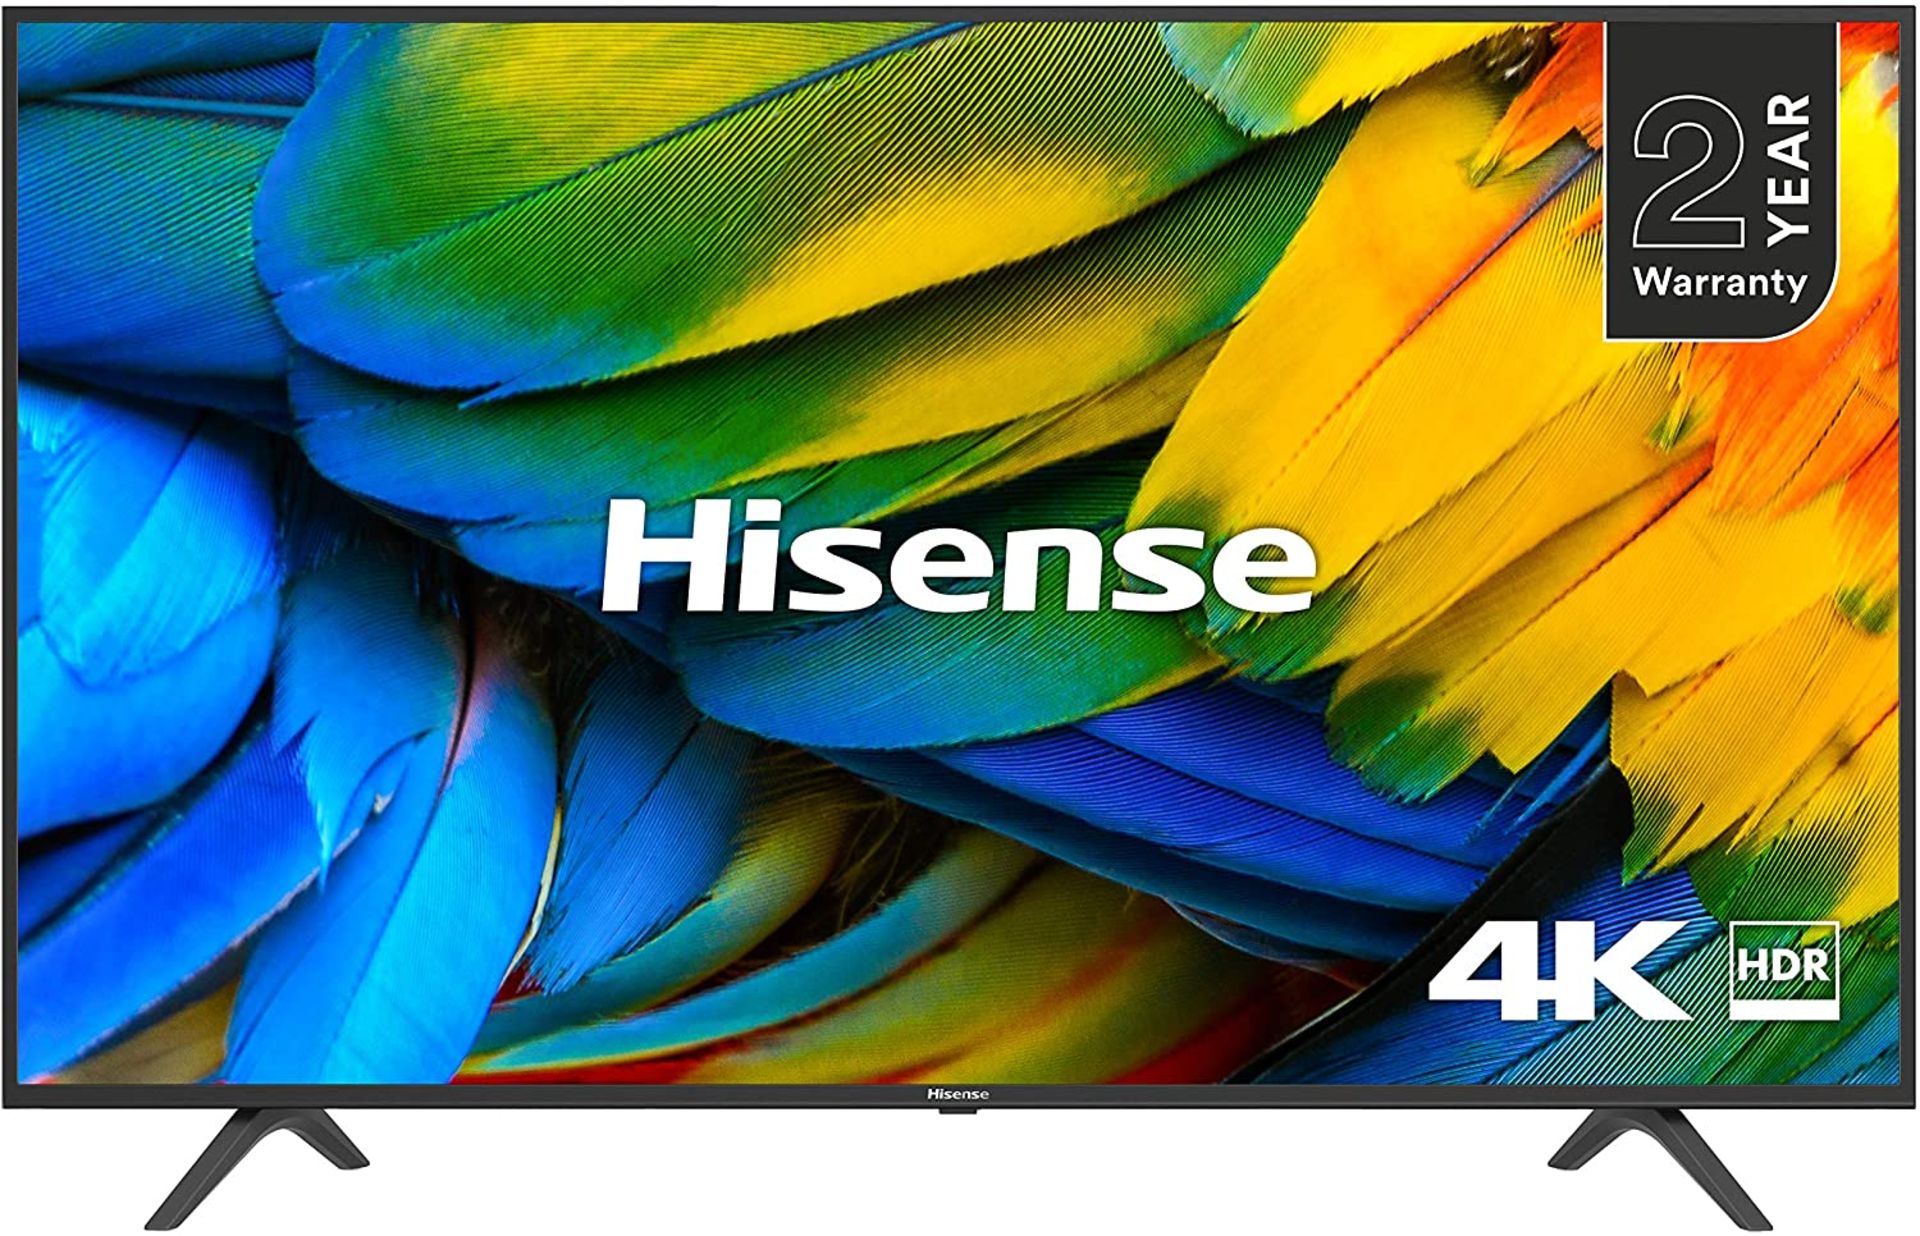 Hisense 43-Inch Smart 4K HDR TV With Freeview Play And DTS Studio Sound RRP £359